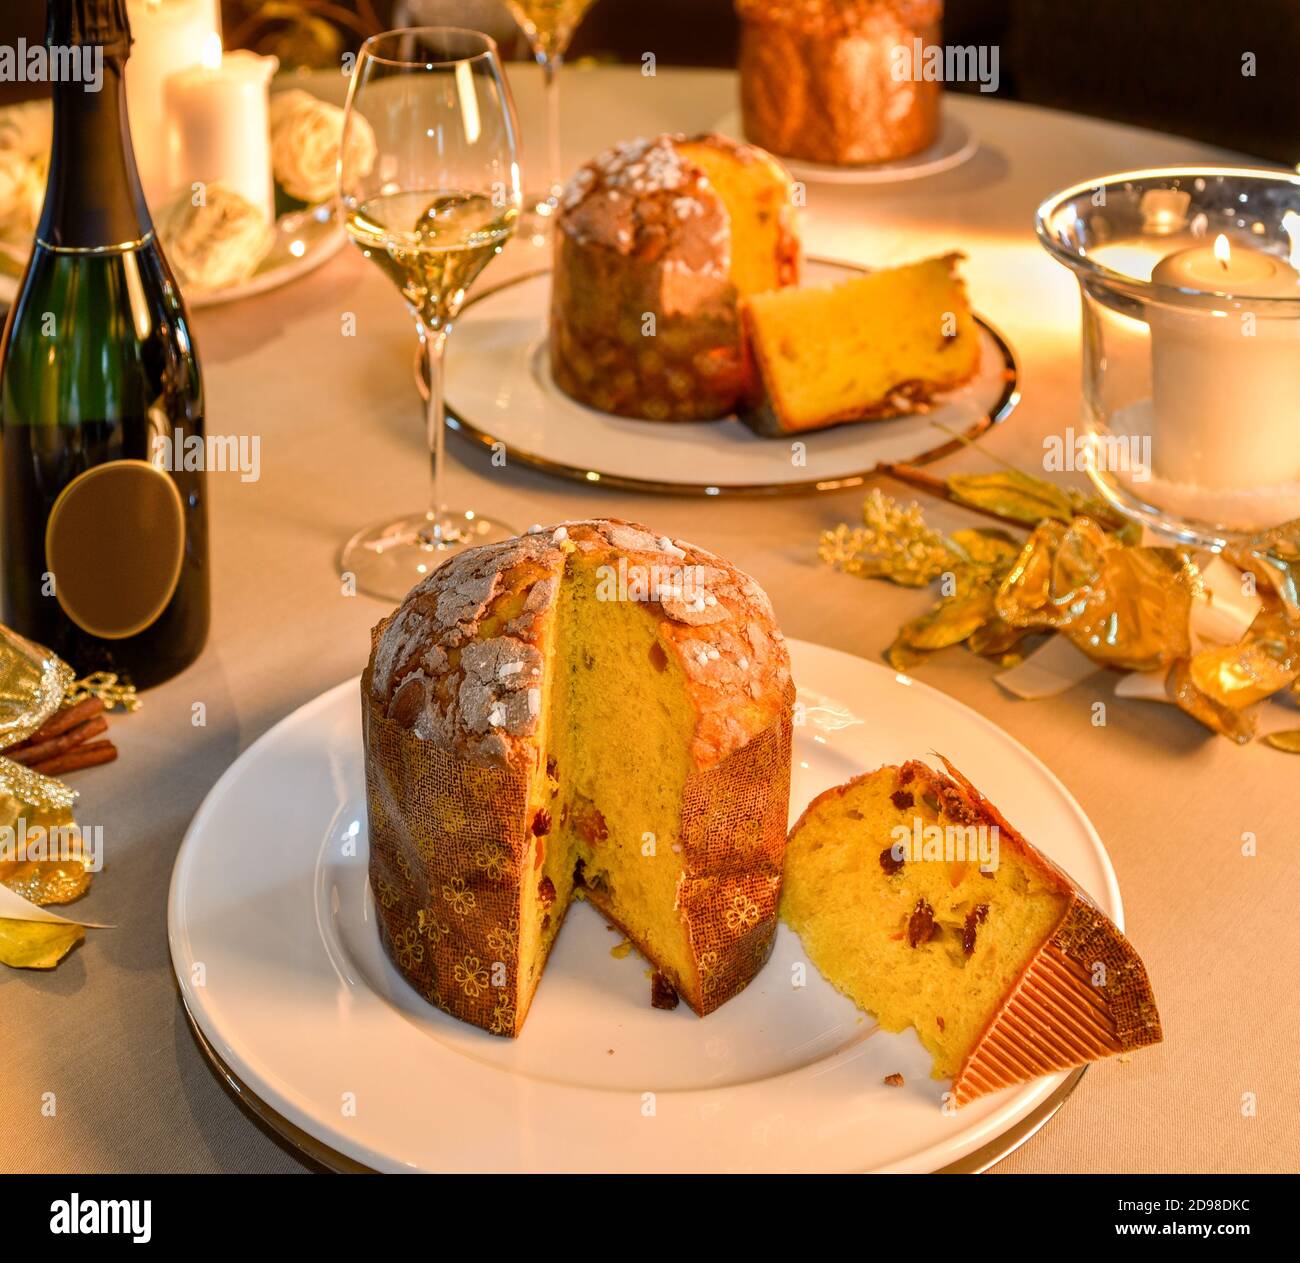 Panettone slice on table set in Christmas style, in the background bottle and glass of champagne and candles Stock Photo